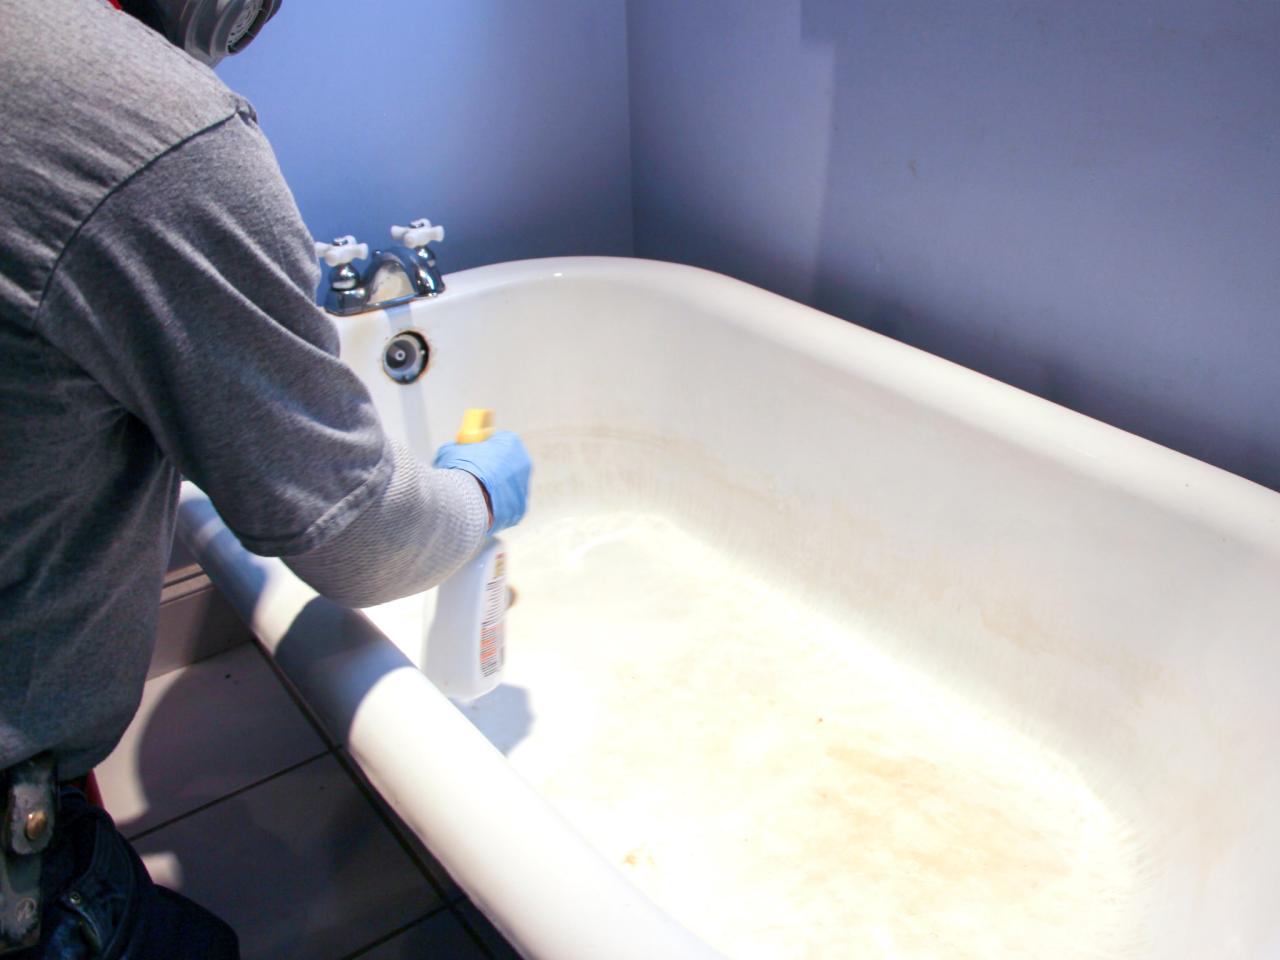 How To Refinish A Bathtub Tos Diy, Painting Bathtubs Do It Yourself